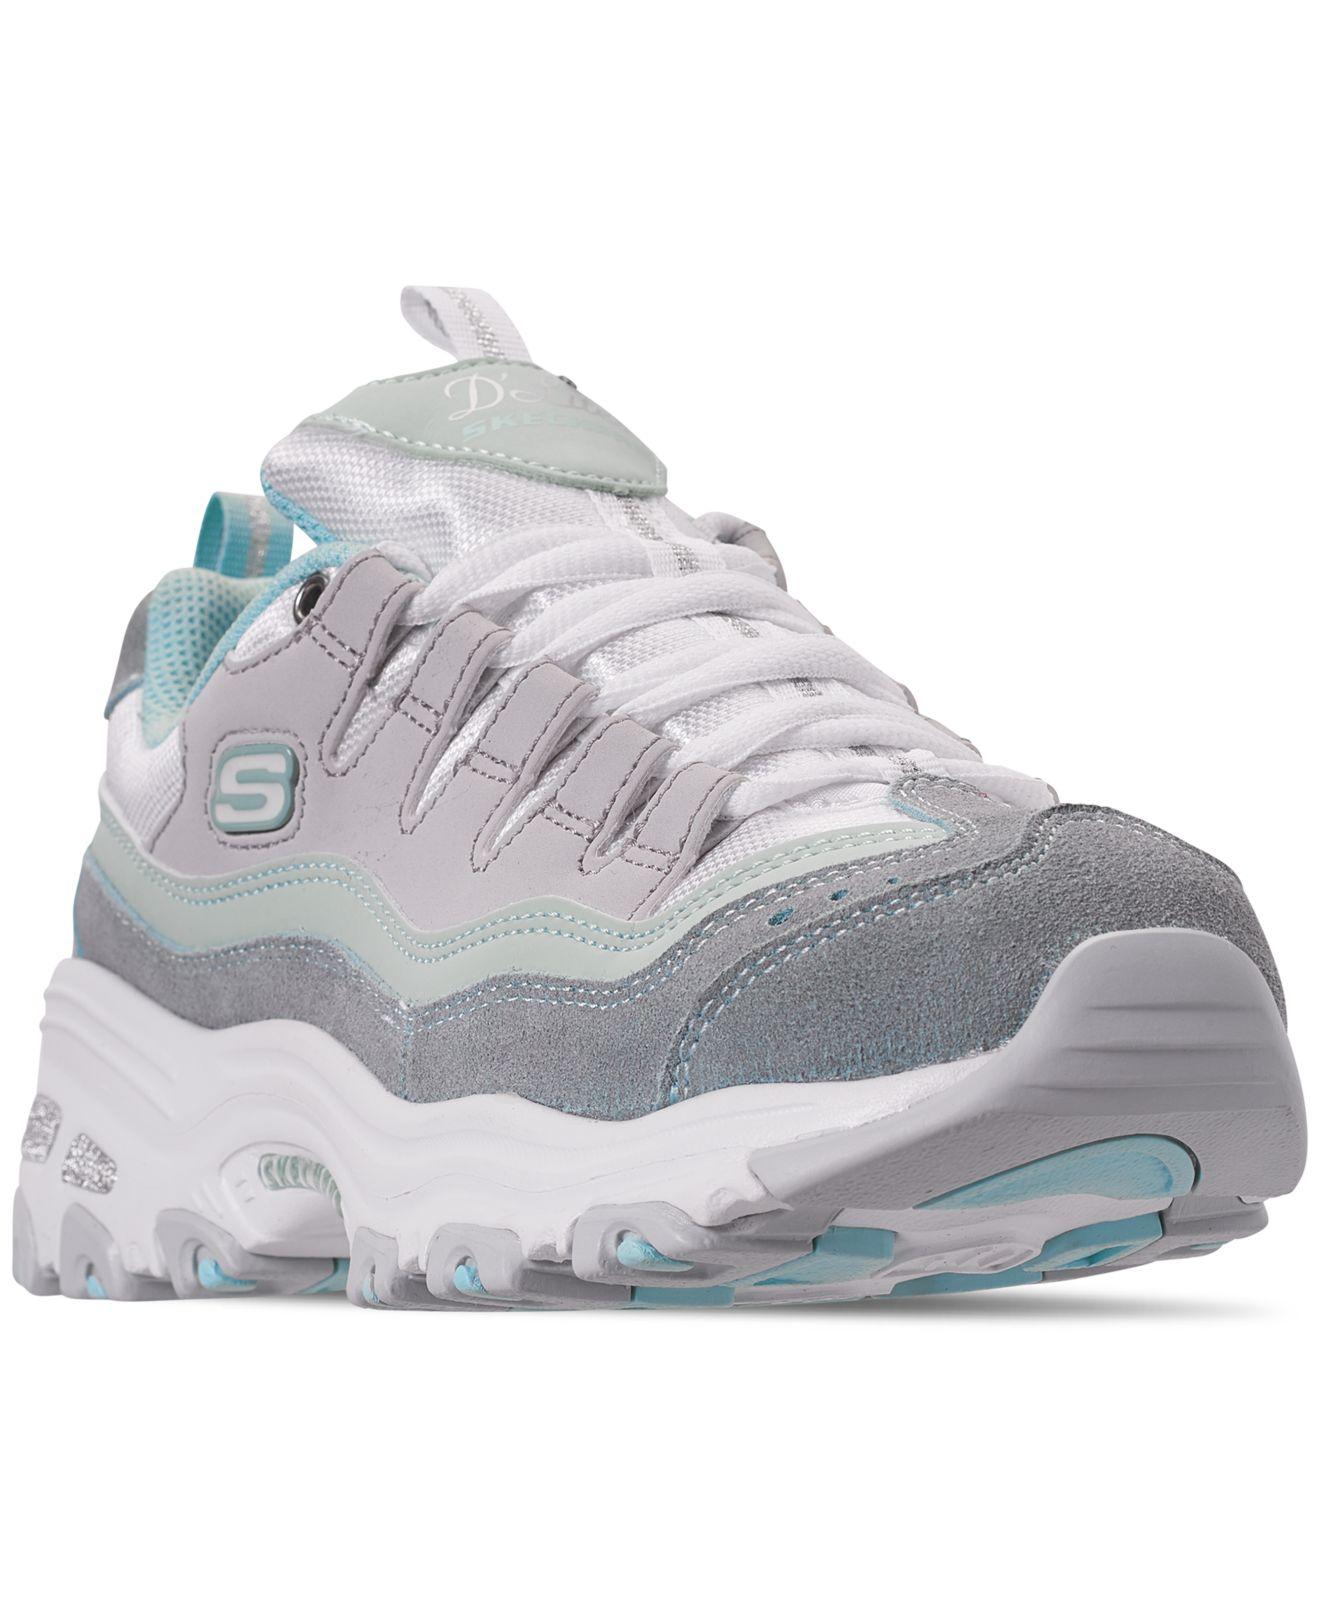 Skechers Leather D'lites - Sure Thing Walking Sneakers From Finish Line in  Light Blue/Grey (Gray) - Save 68% - Lyst